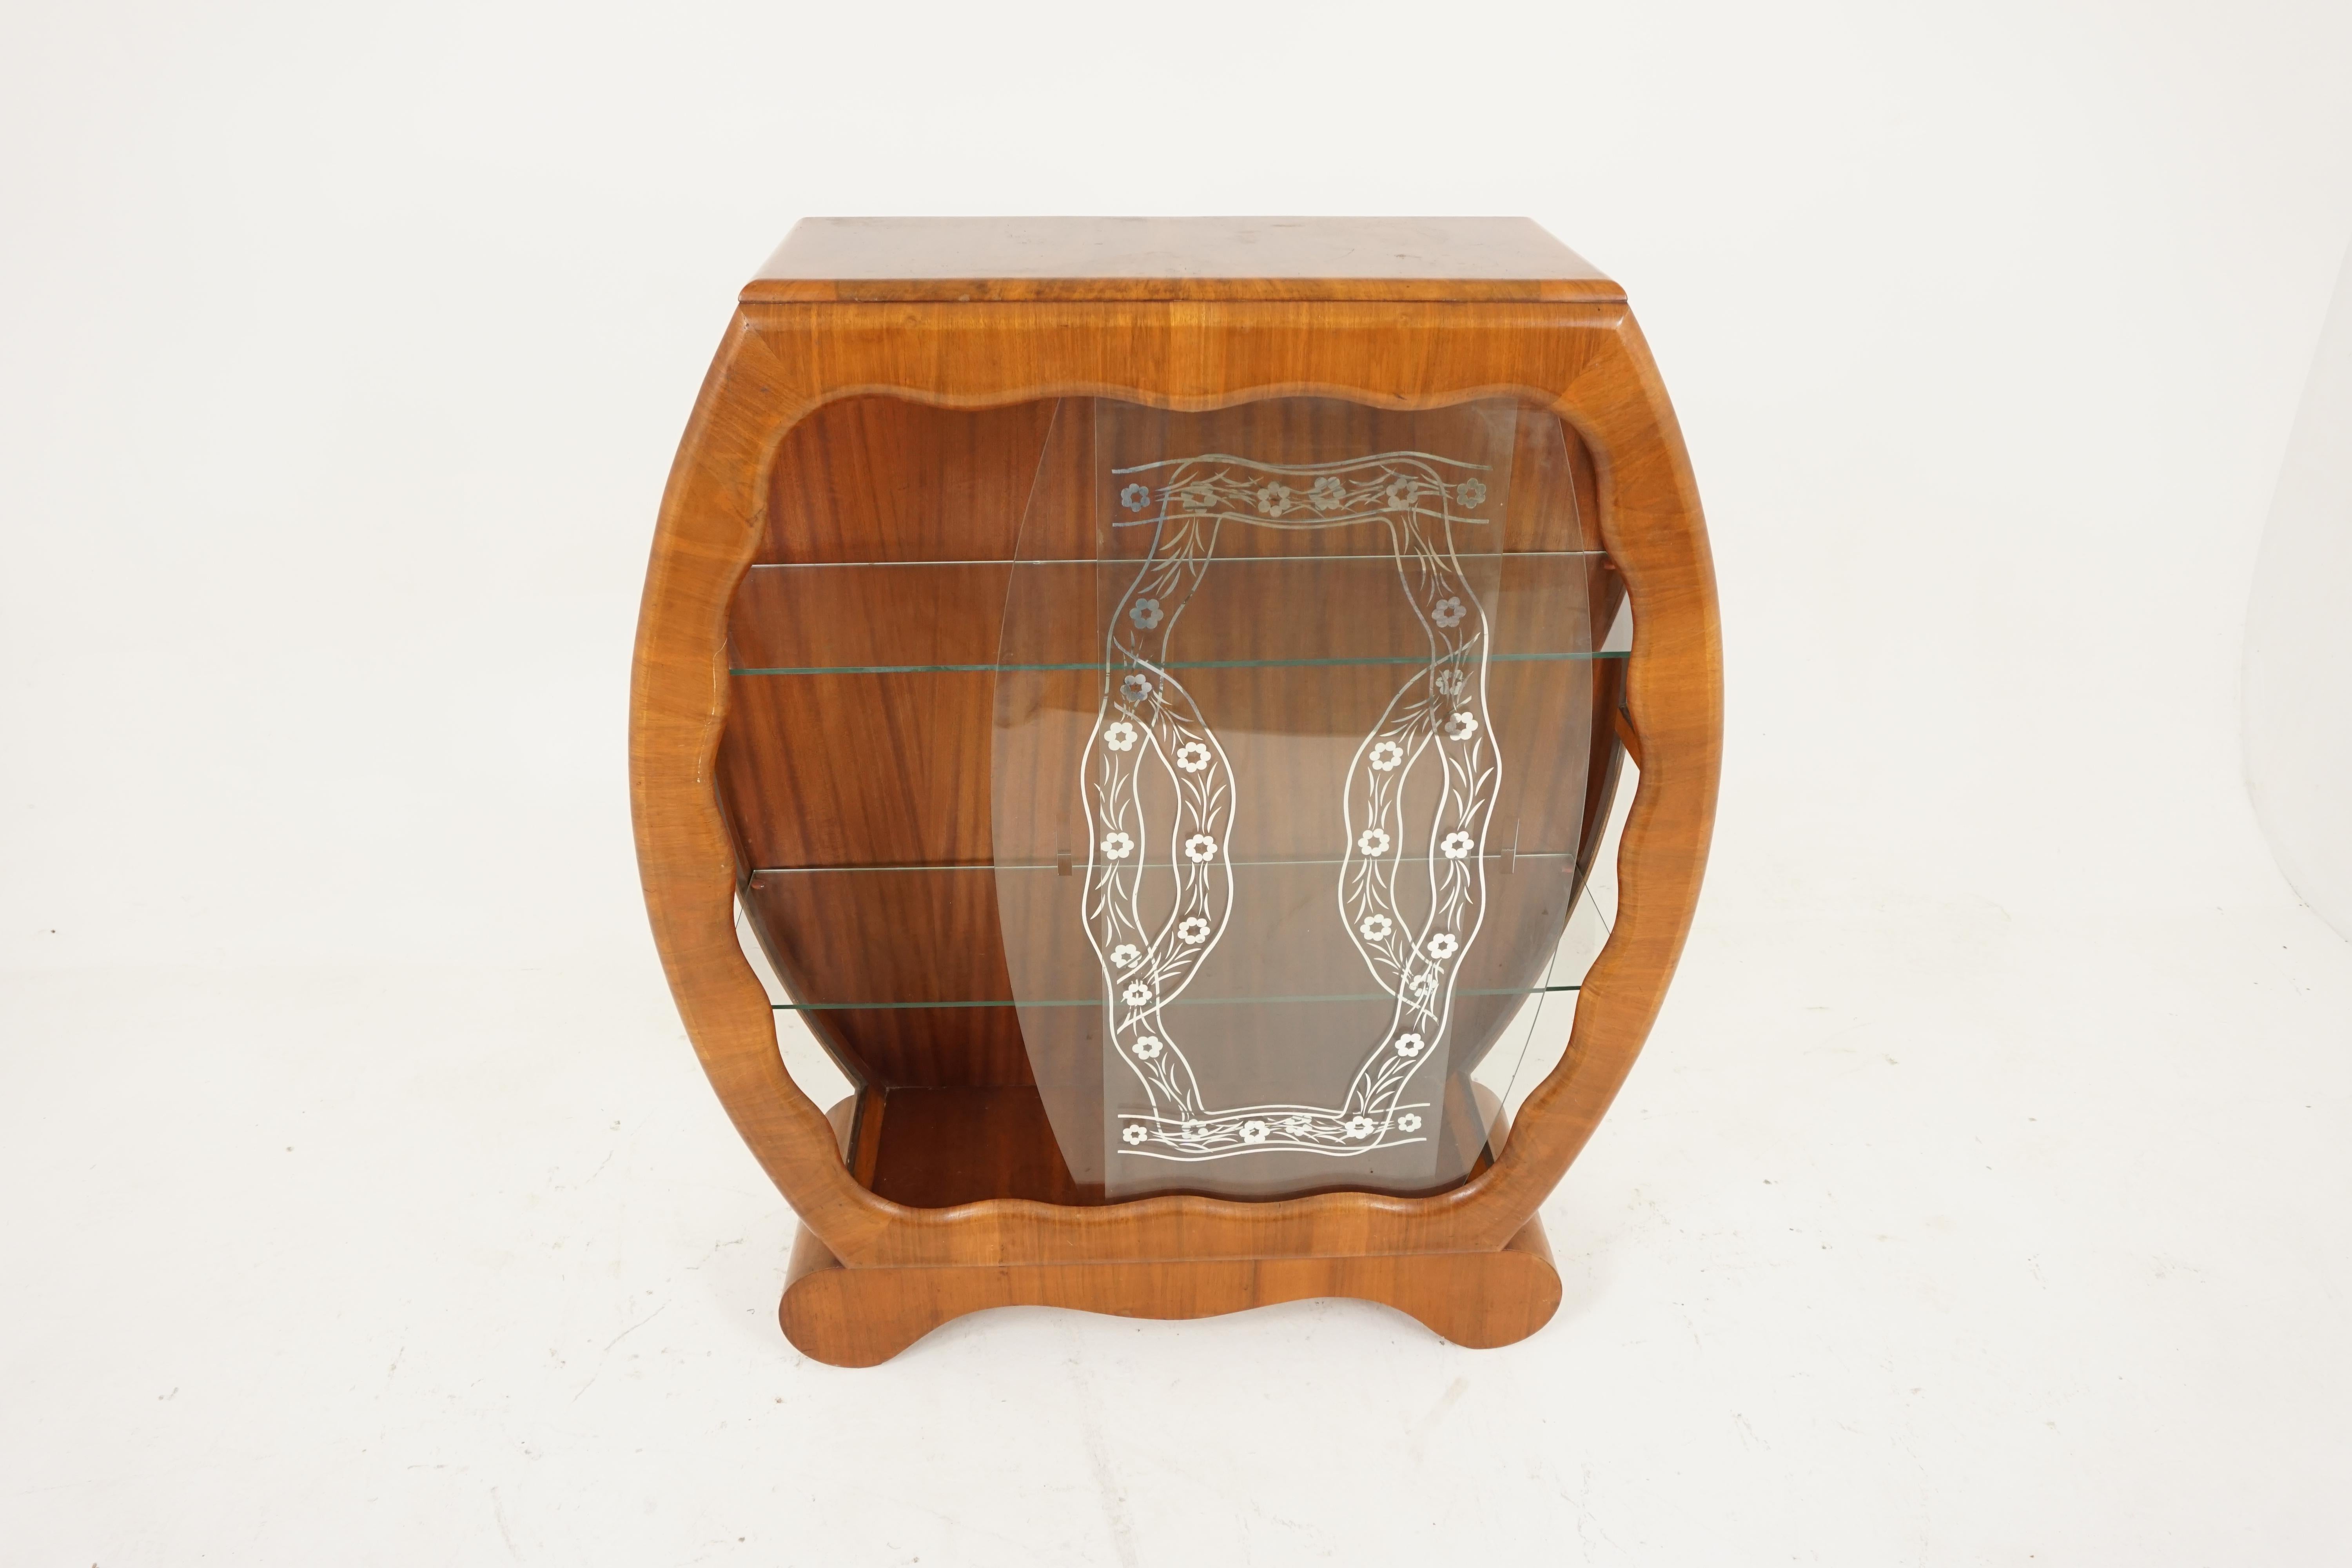 Art Deco figured walnut display, drinks, china cabinet, Scotland, 1930, B2069

Scotland 1930
Solid walnut and veneer 
Original finish
Moulded rectangular top
Rounded ends
Pair of sliding glass doors
Original silvered decoration on the